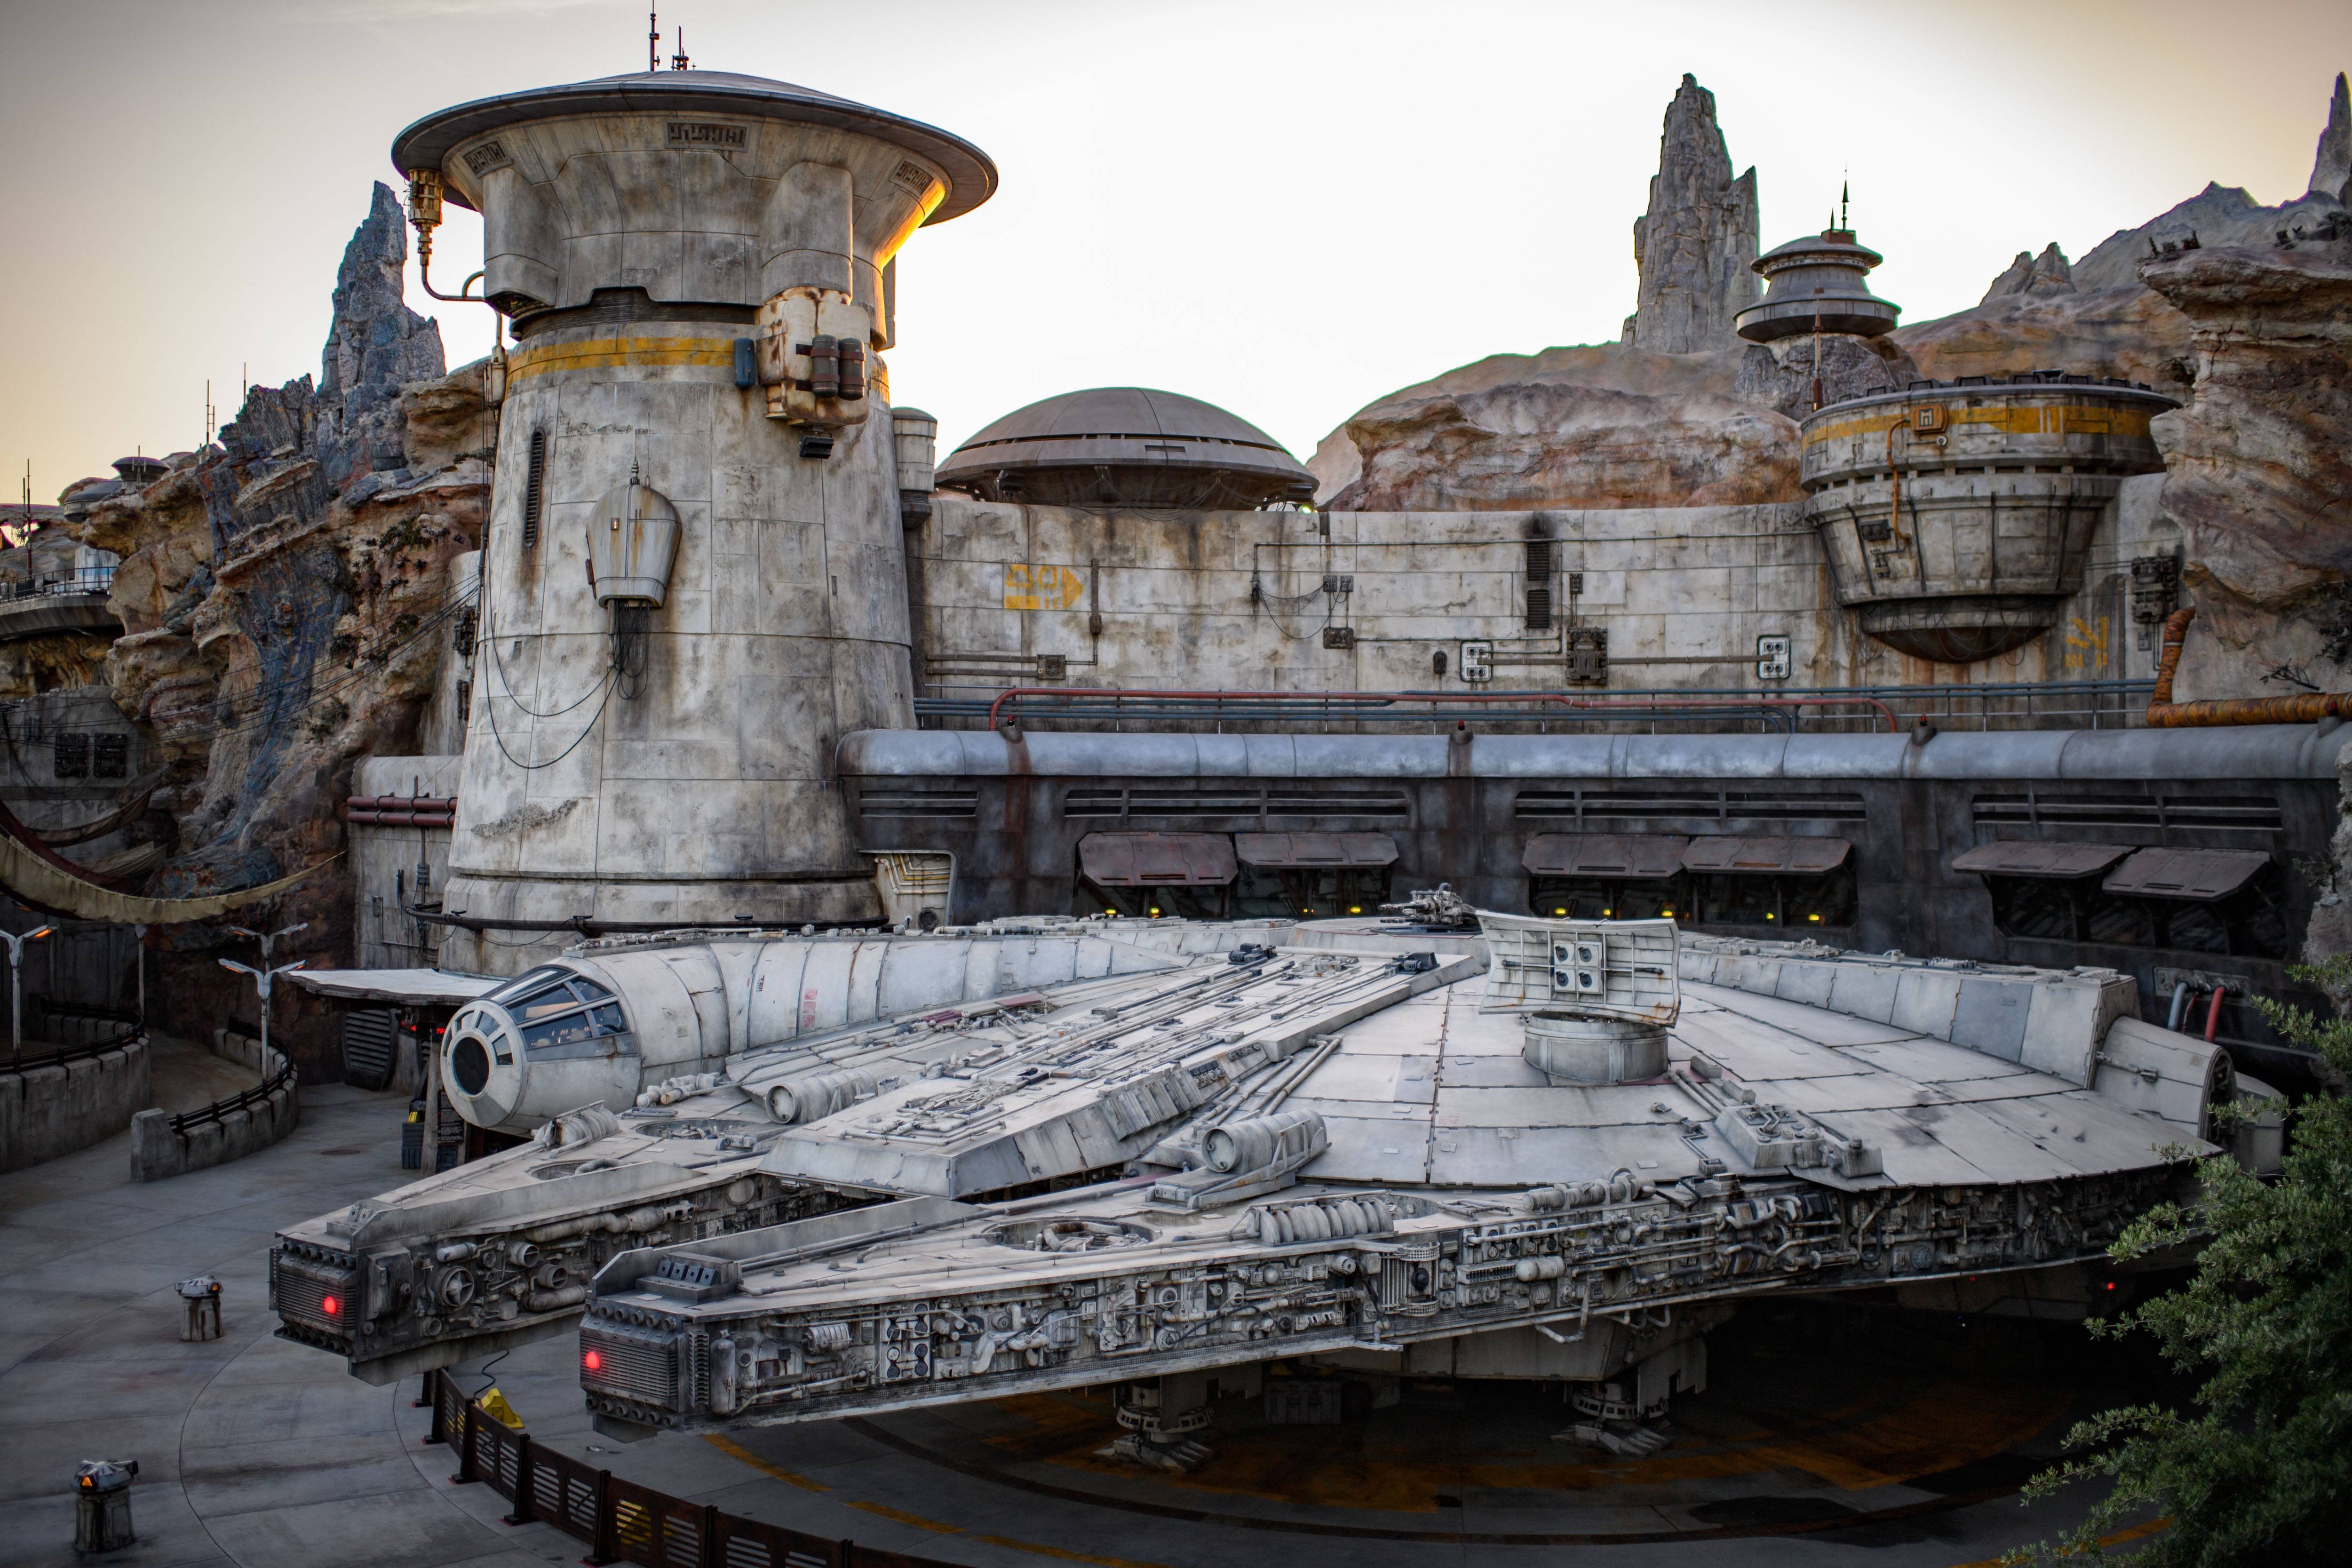 NVIDIA reveals details on some of the tech that will power the Star Wars Galaxy's Edge Millennium Falcon attraction